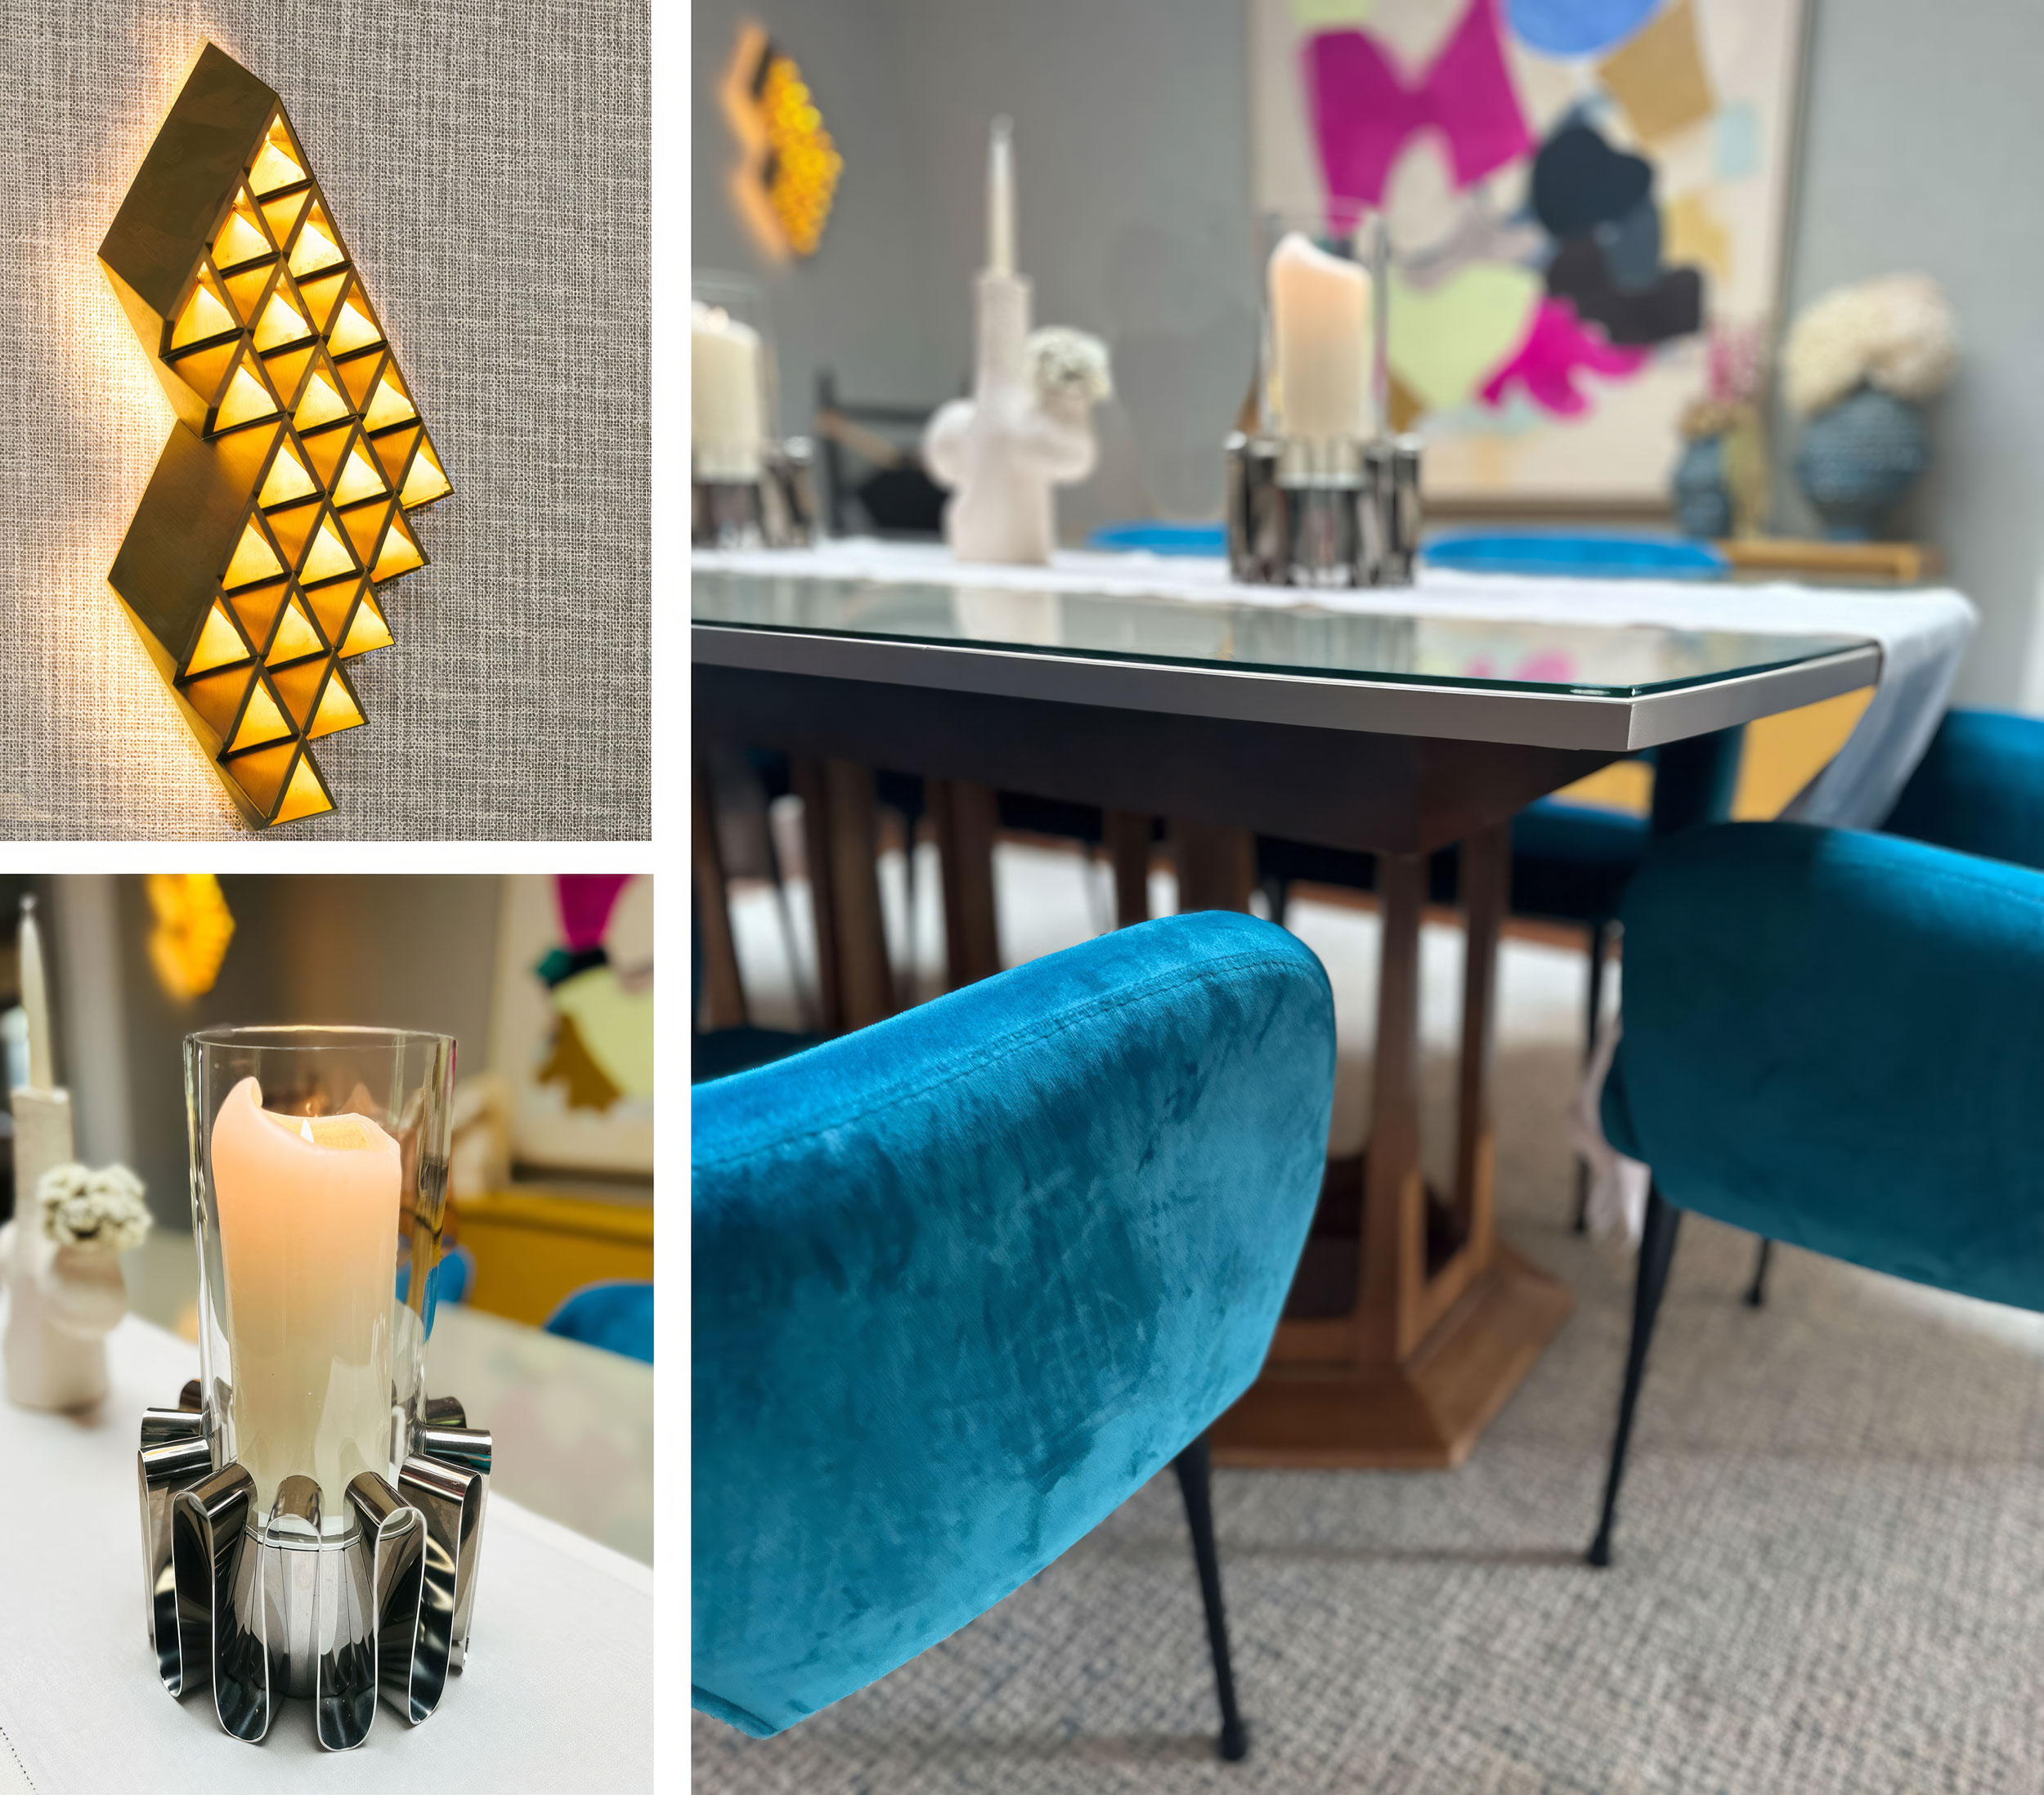 Georg Jensen candle holders used by Kim Colwell for her interior design project in Los Angeles.